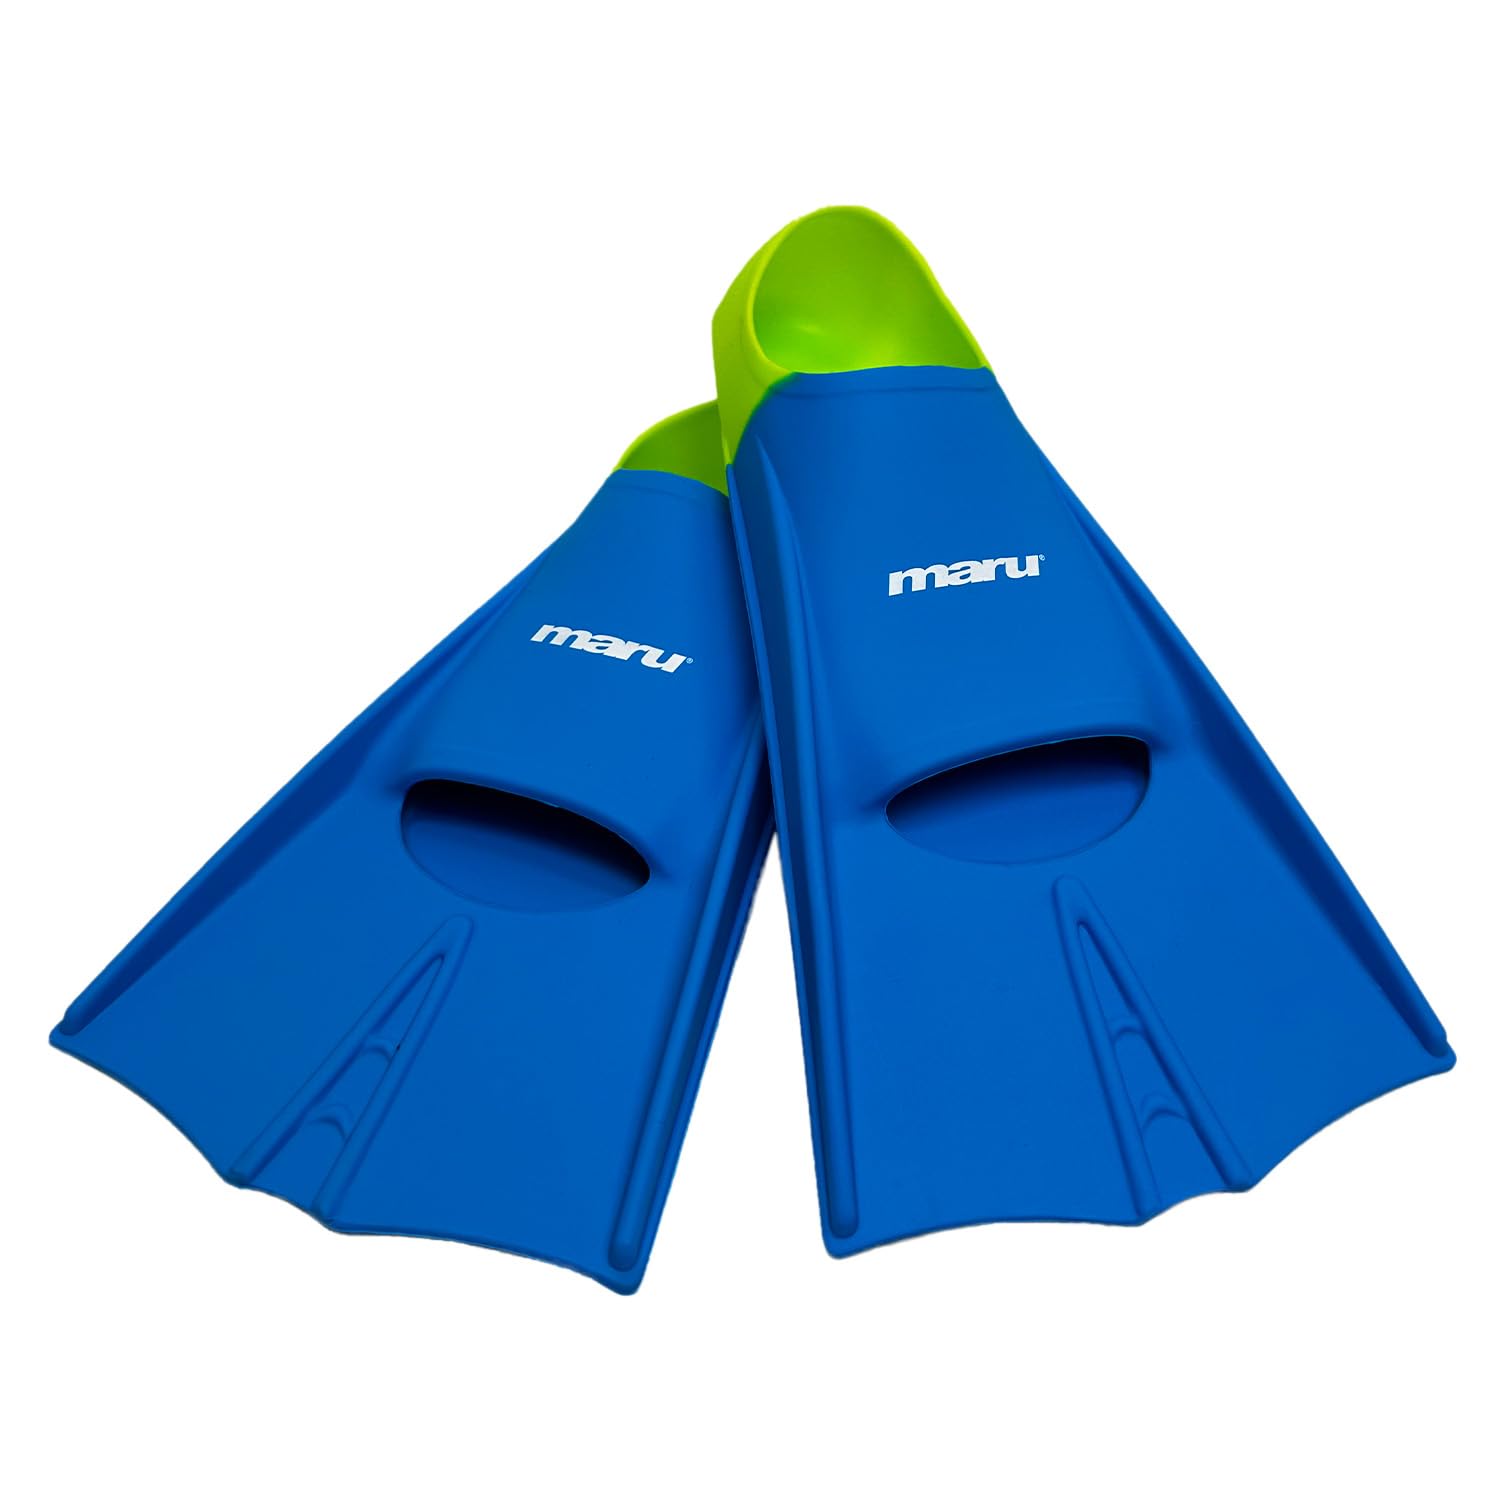 Maru Training Fins, Silicone Swimming Flippers for Stronger, Faster Kick with greater Propulsion, Used for Training, Unisex Swim